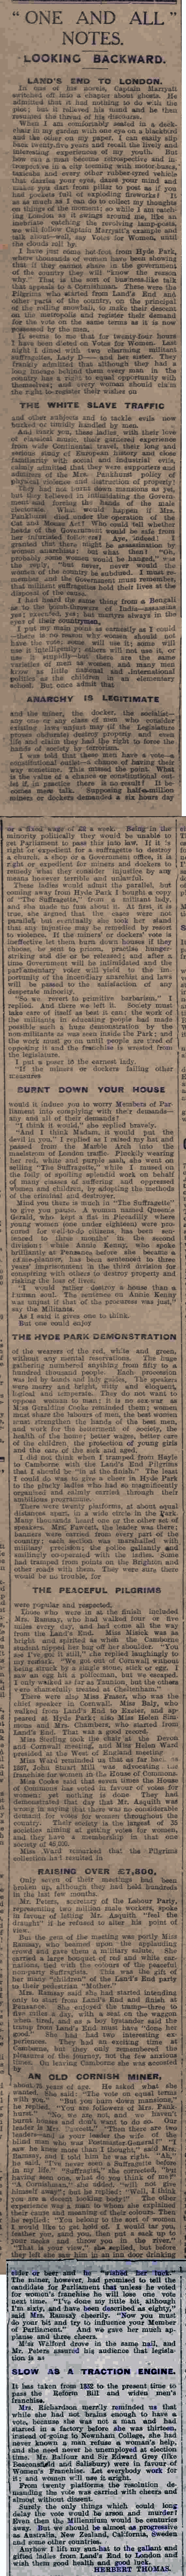 Lands End to London suffragette march report 31 July 1913 